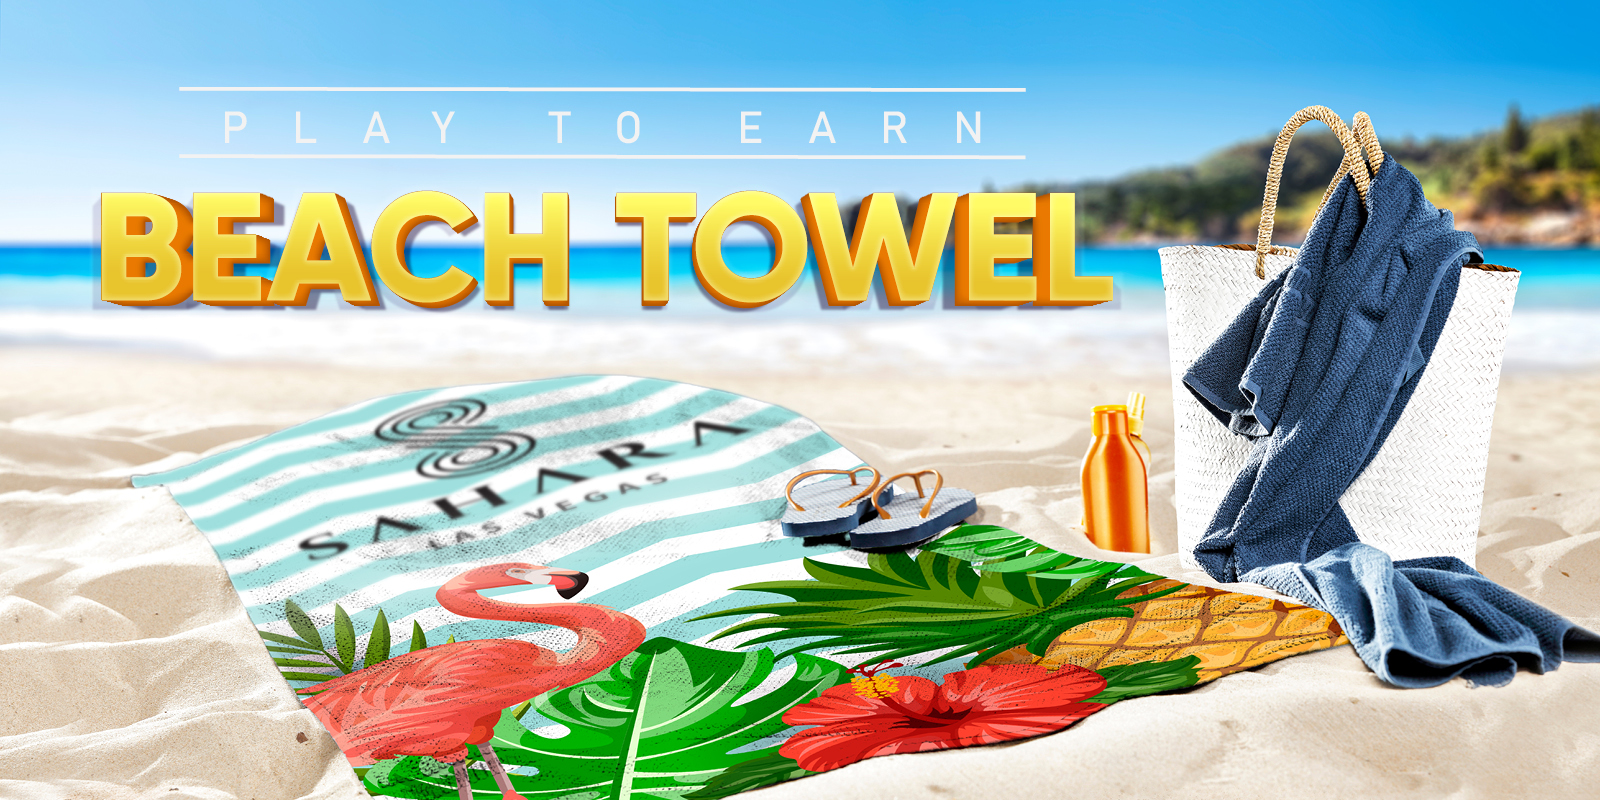 visual that promotes a beach towel giveaway. It says Play To Earn Beach Towel and shows the beach towel on the beach near the ocean with a beach bag sandals and a water bottle